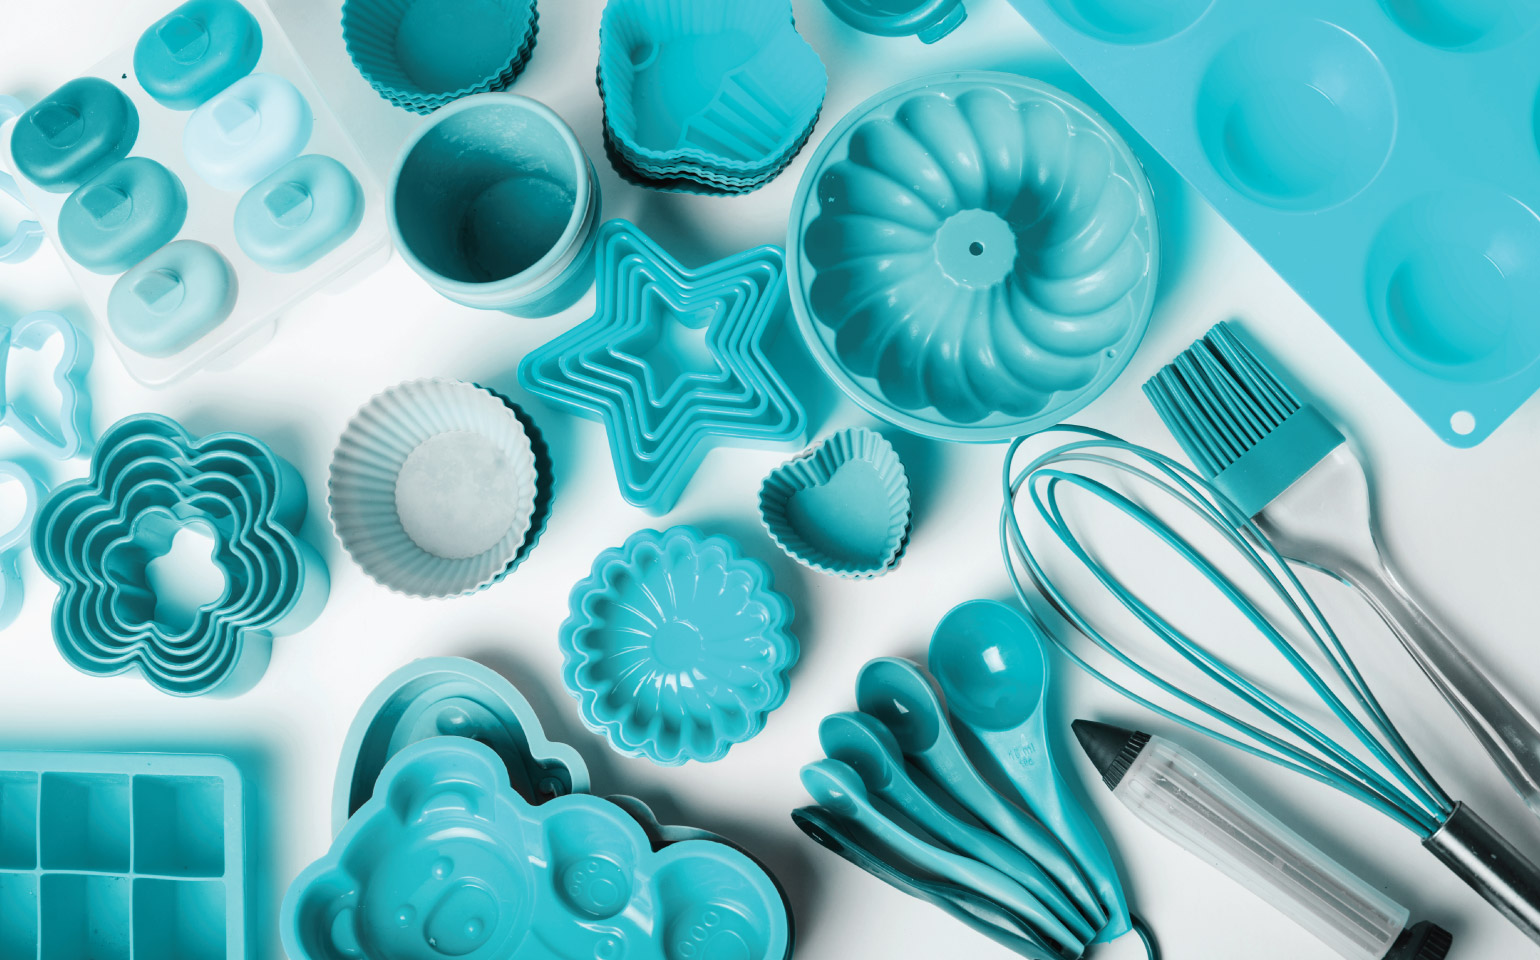 Silicone Baking Products